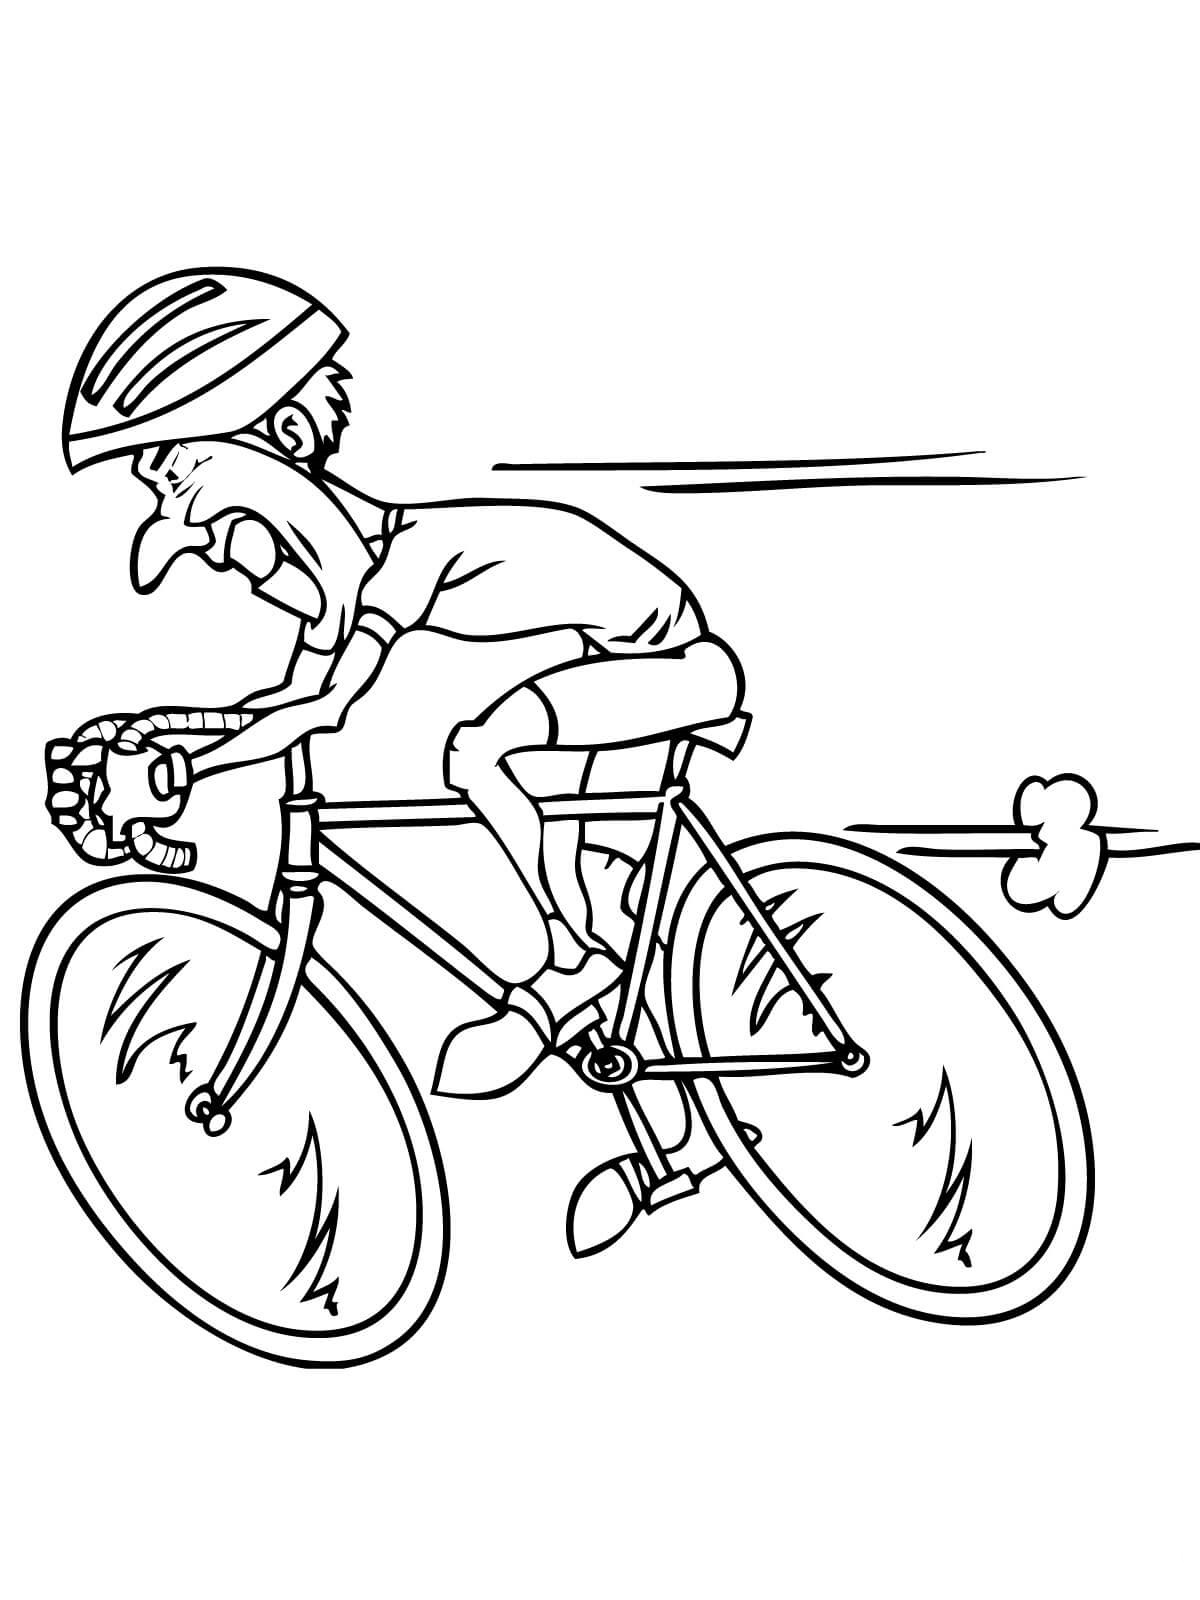 Racing Bicycle Coloring Page